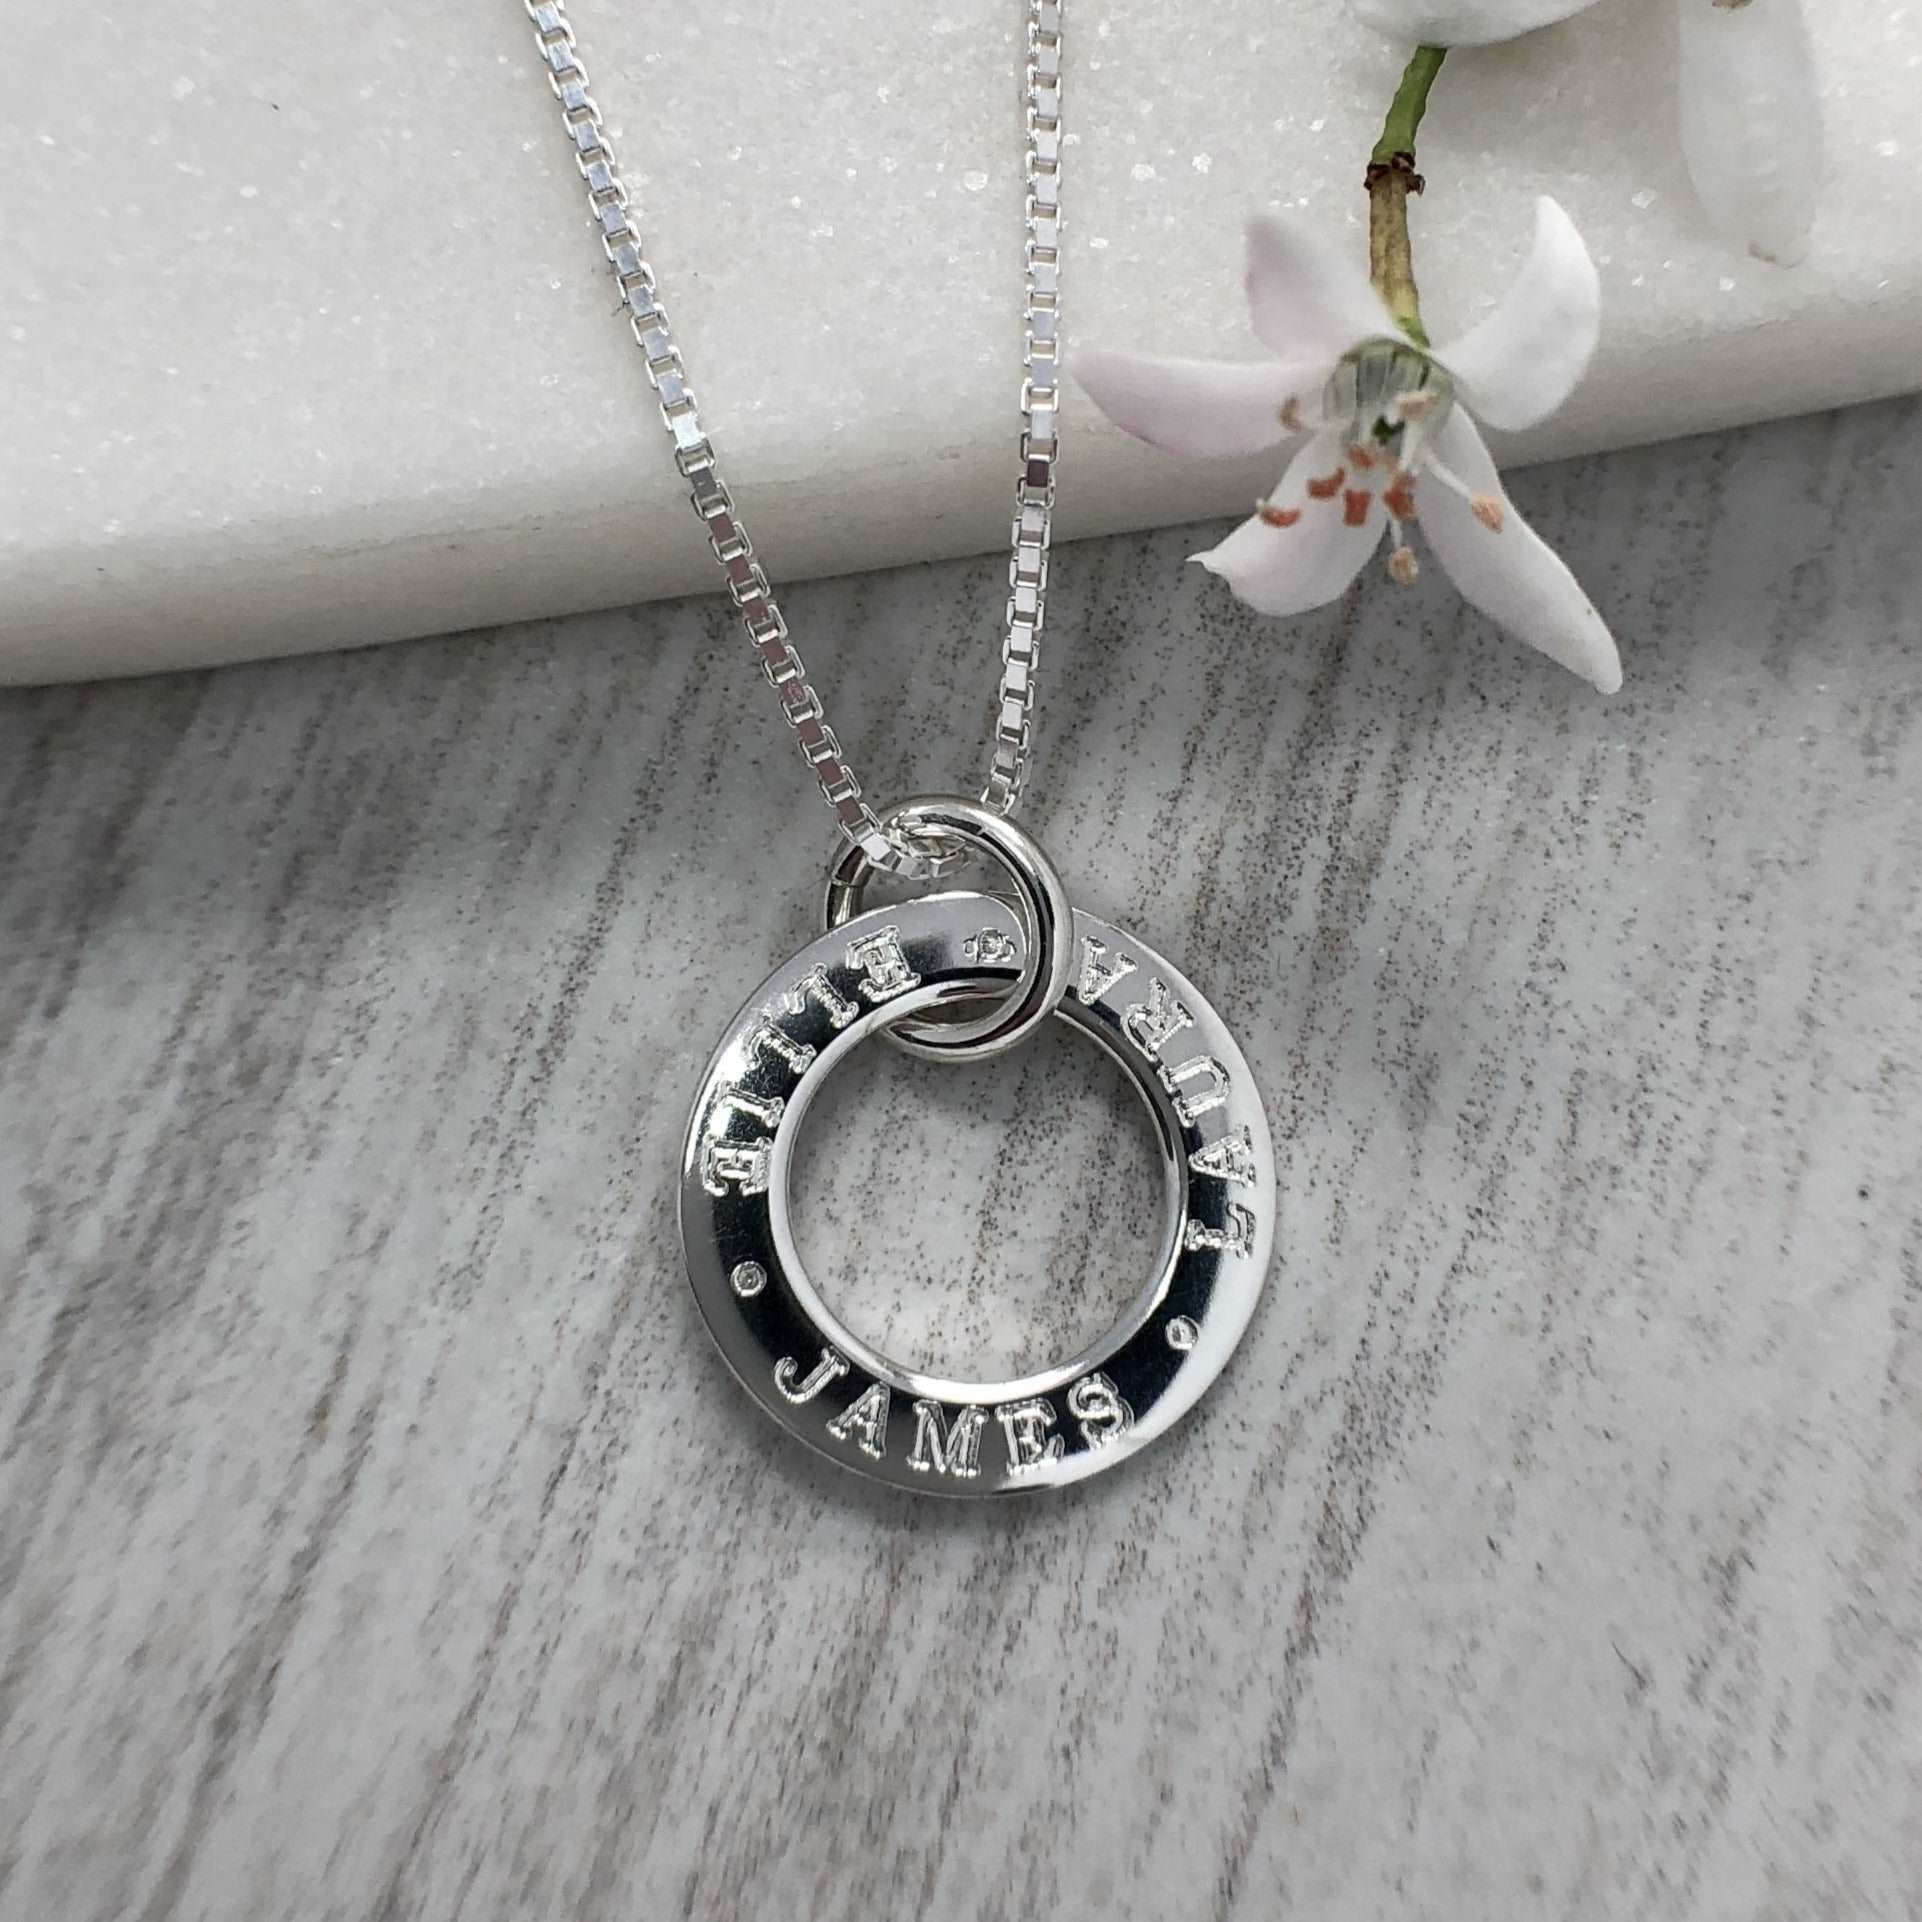 engraved sterling silver necklace, washer style pendant, up to 3 names added